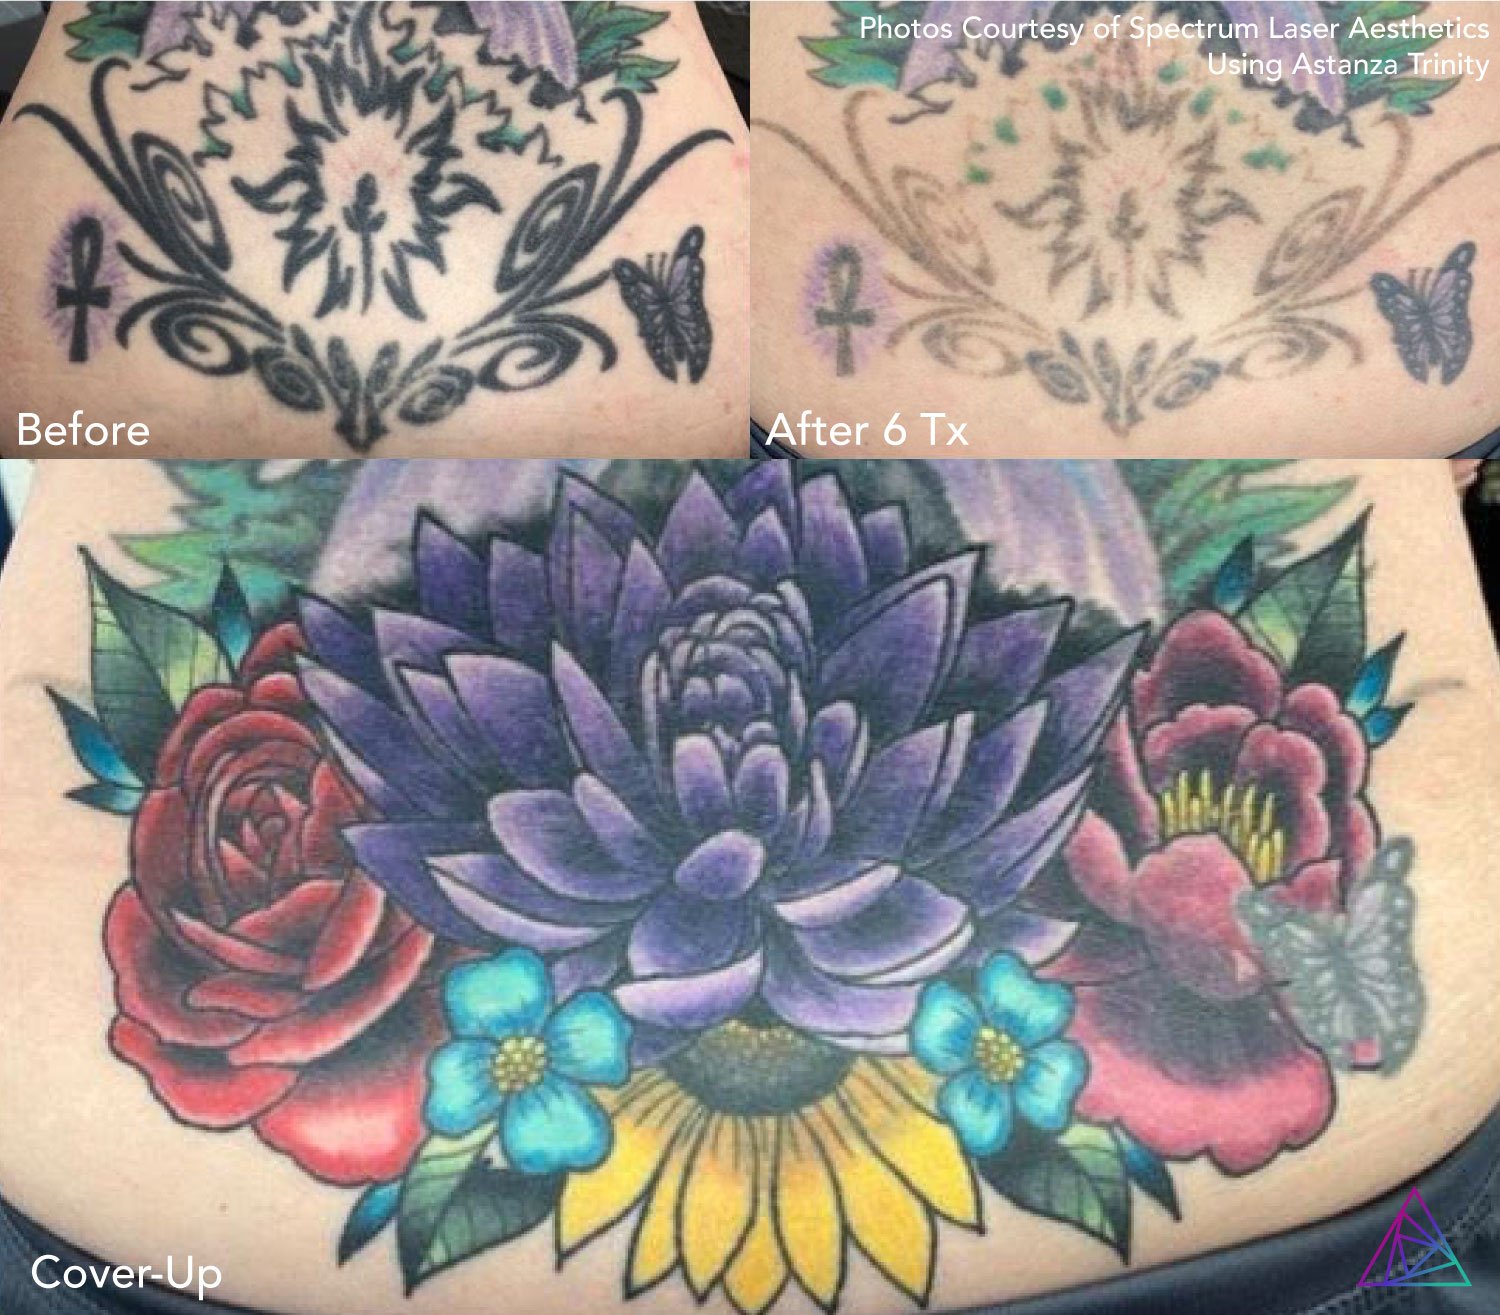 Delete Tattoo Removal  Medical Salon  Who says lasers cant remove purple  and pink inks  At Delete our physicians use the PicoWay laser to remove  tattoos of all shapes colors